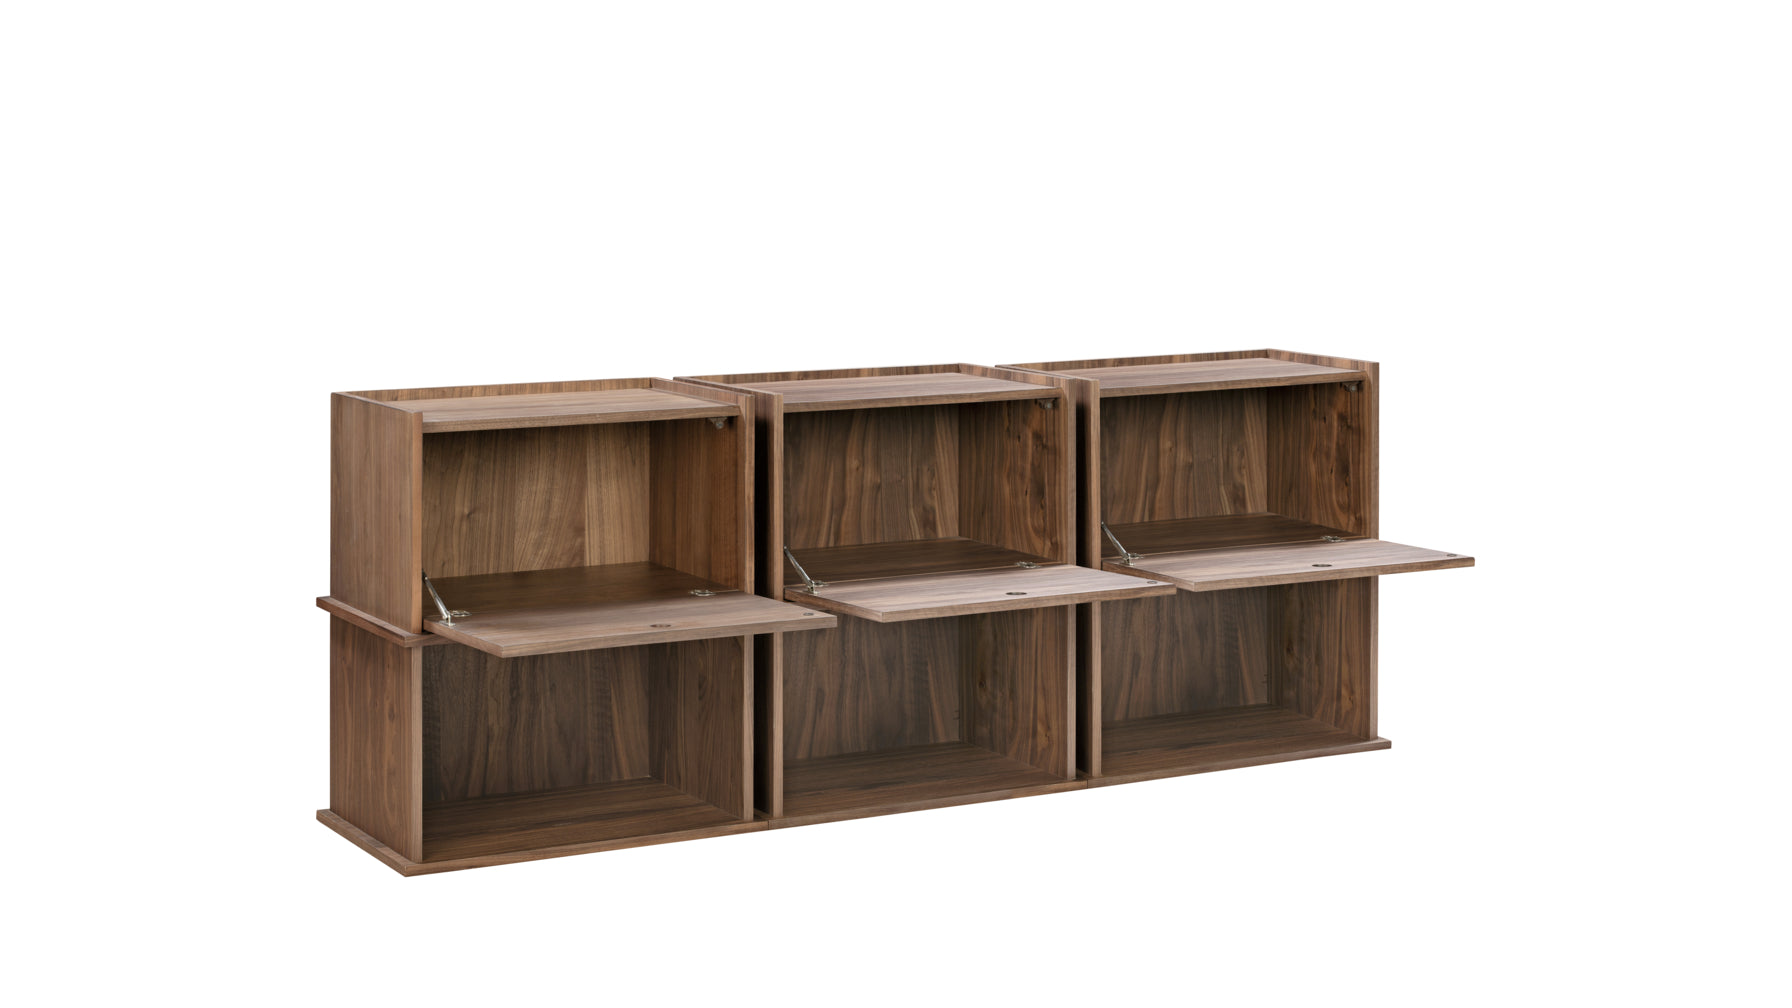 Keep Stacking Storage System 6-Piece, Open and Closed, Walnut - Image 4